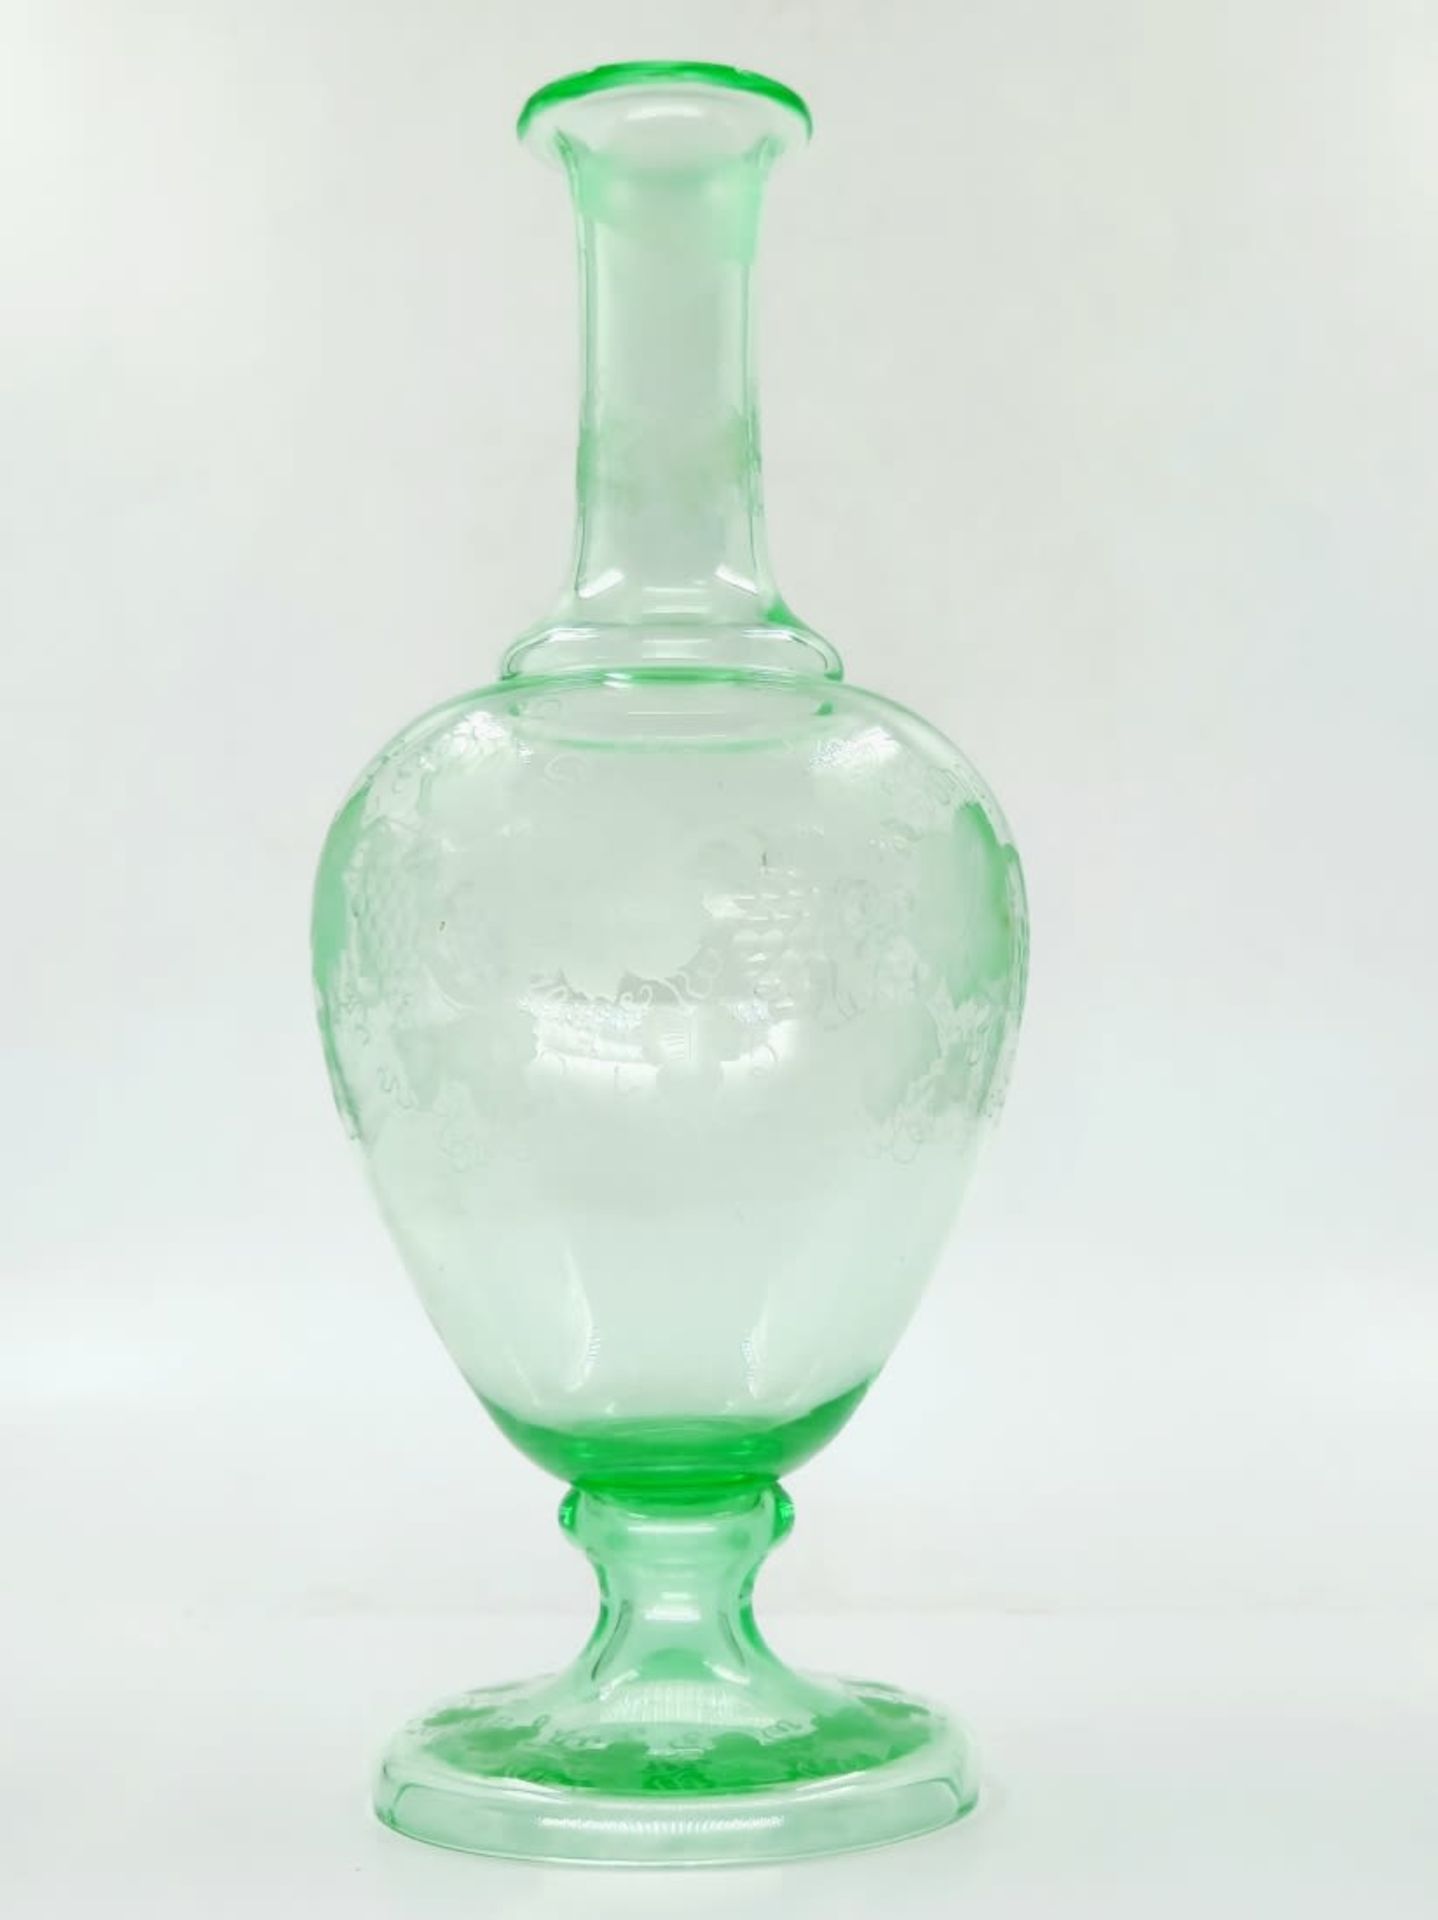 An antique 19th century decanter, green Uranium glass, with hand-engraved decorations and a monogram